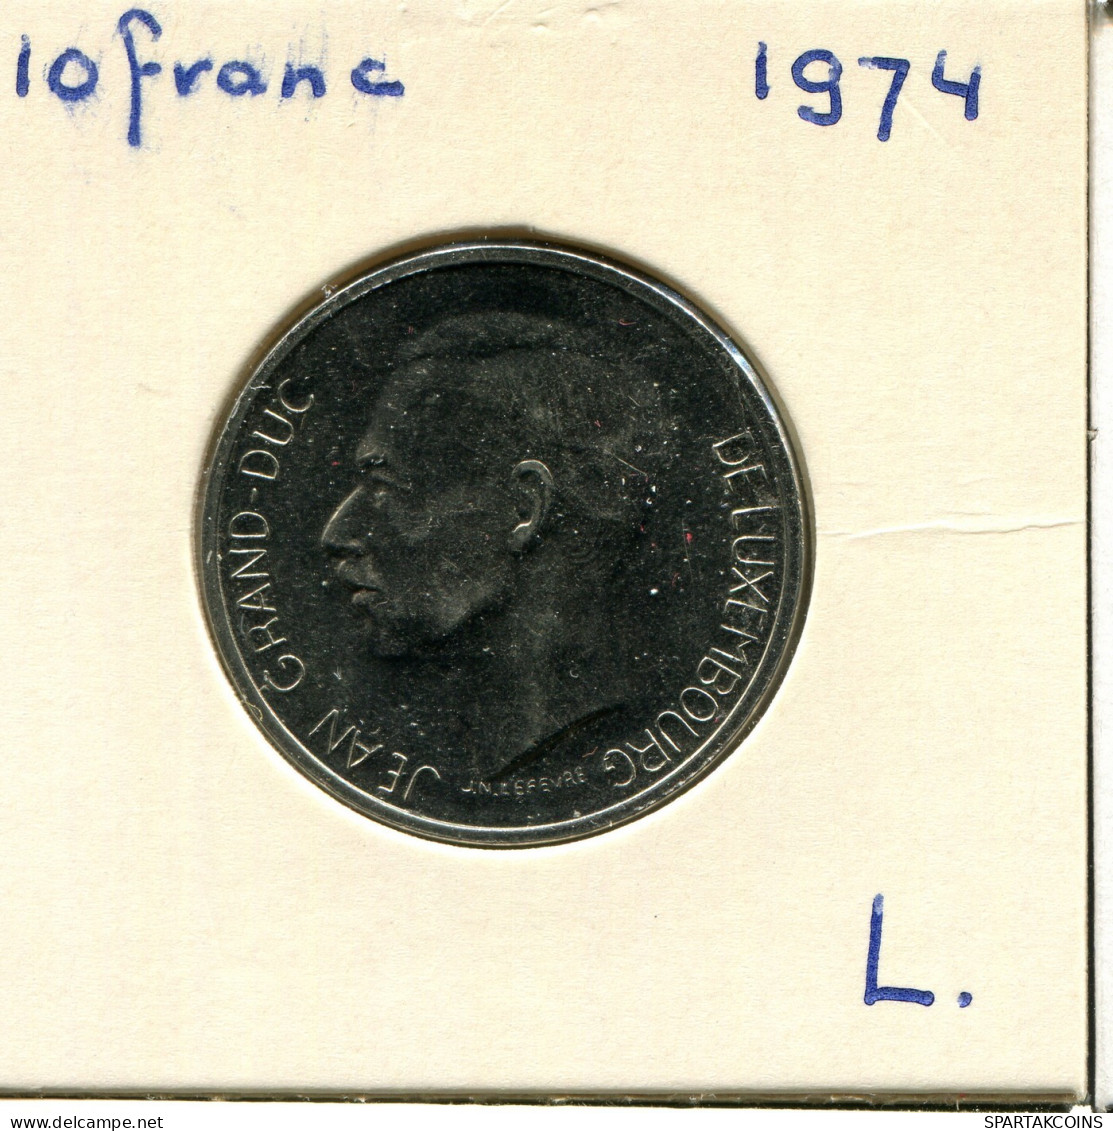 10 FRANCS 1974 LUXEMBOURG Pièce #AW832.F.A - Lussemburgo